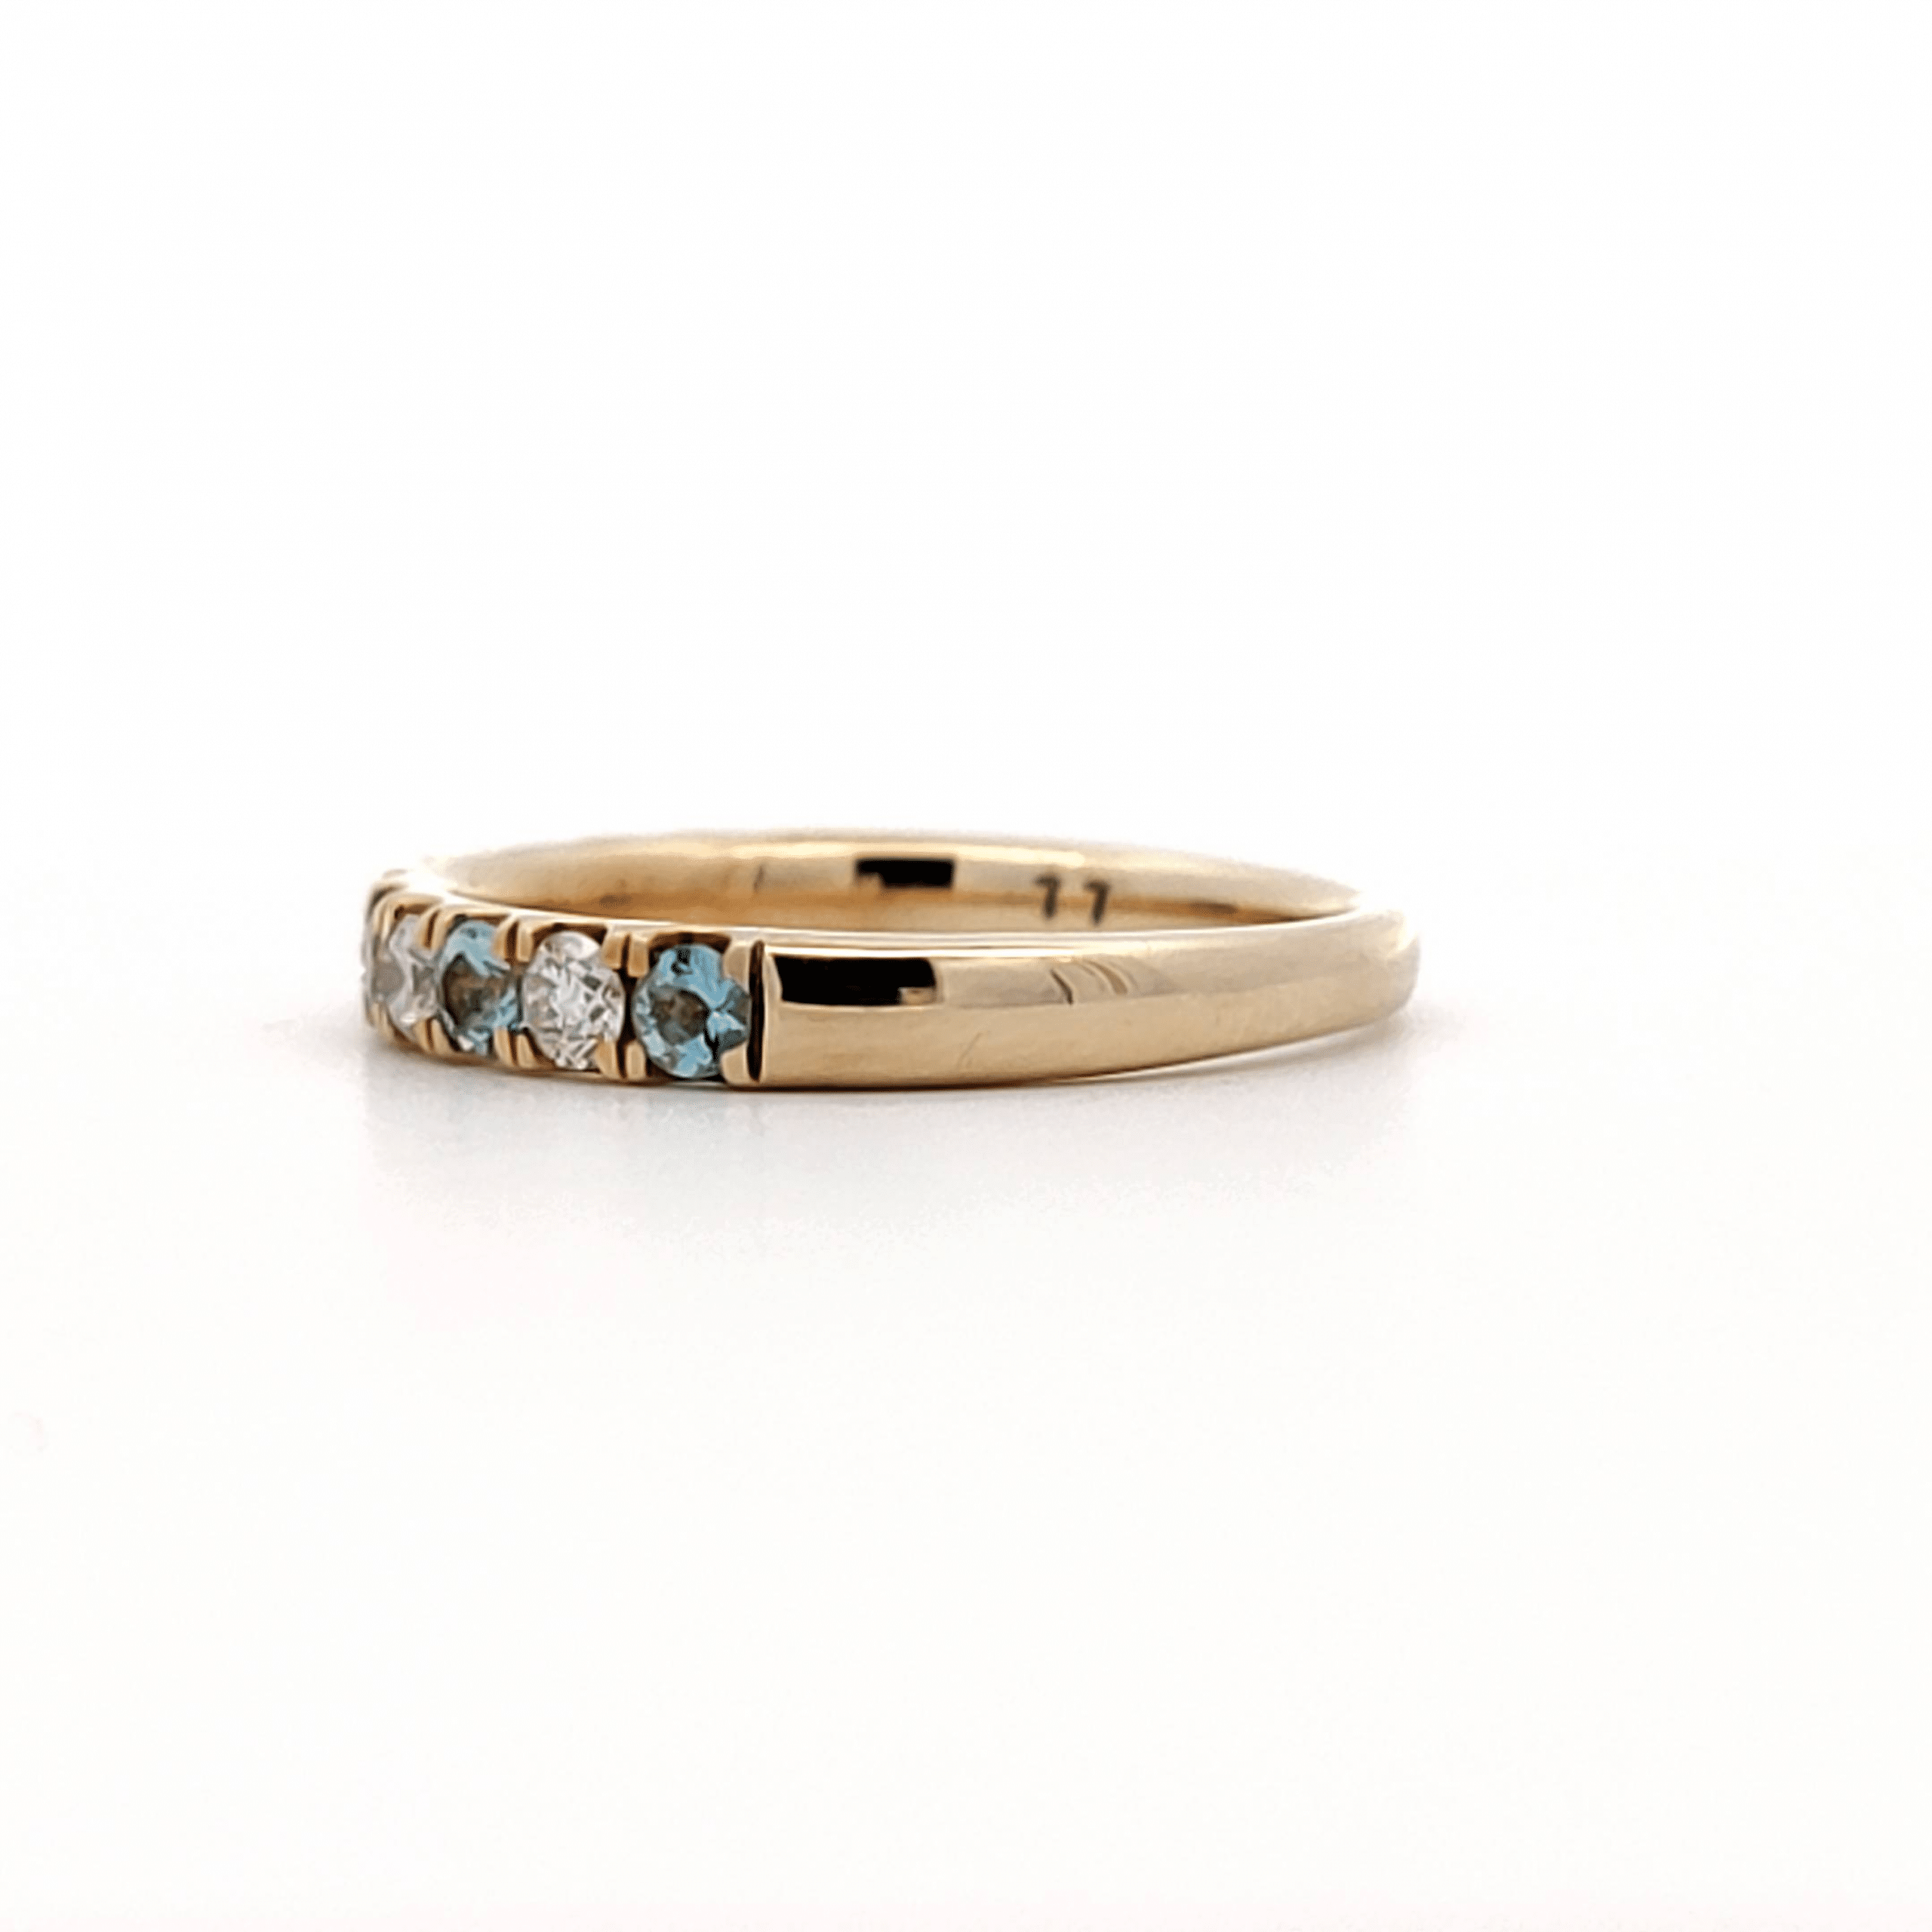 0.37ct Blue Topaz and 0.29ct Diamond Ring set in Yellow Gold